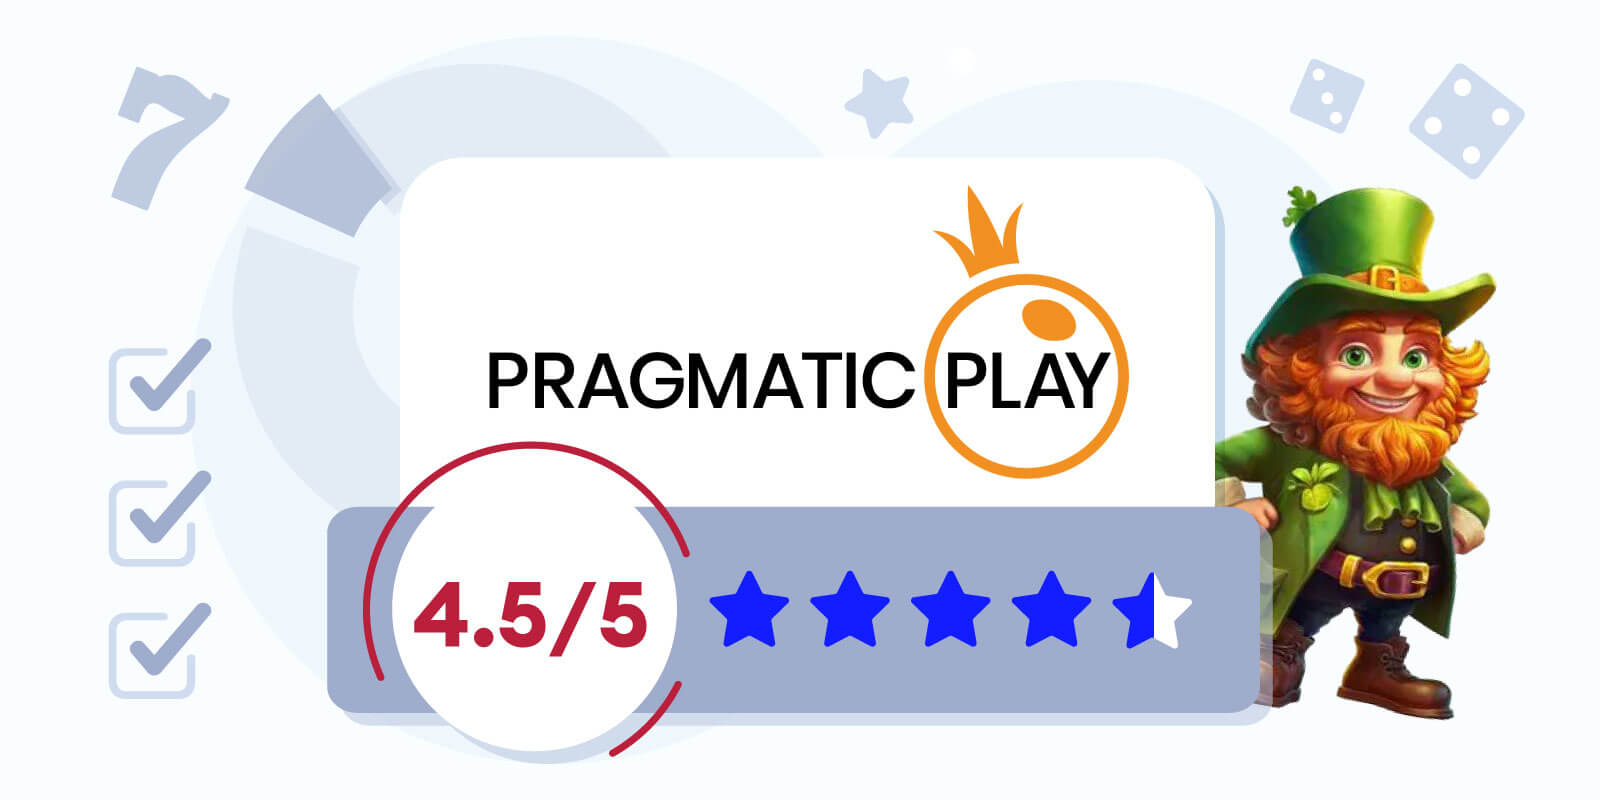 Our Review for Pragmatic Play - 4.5/5 Rating